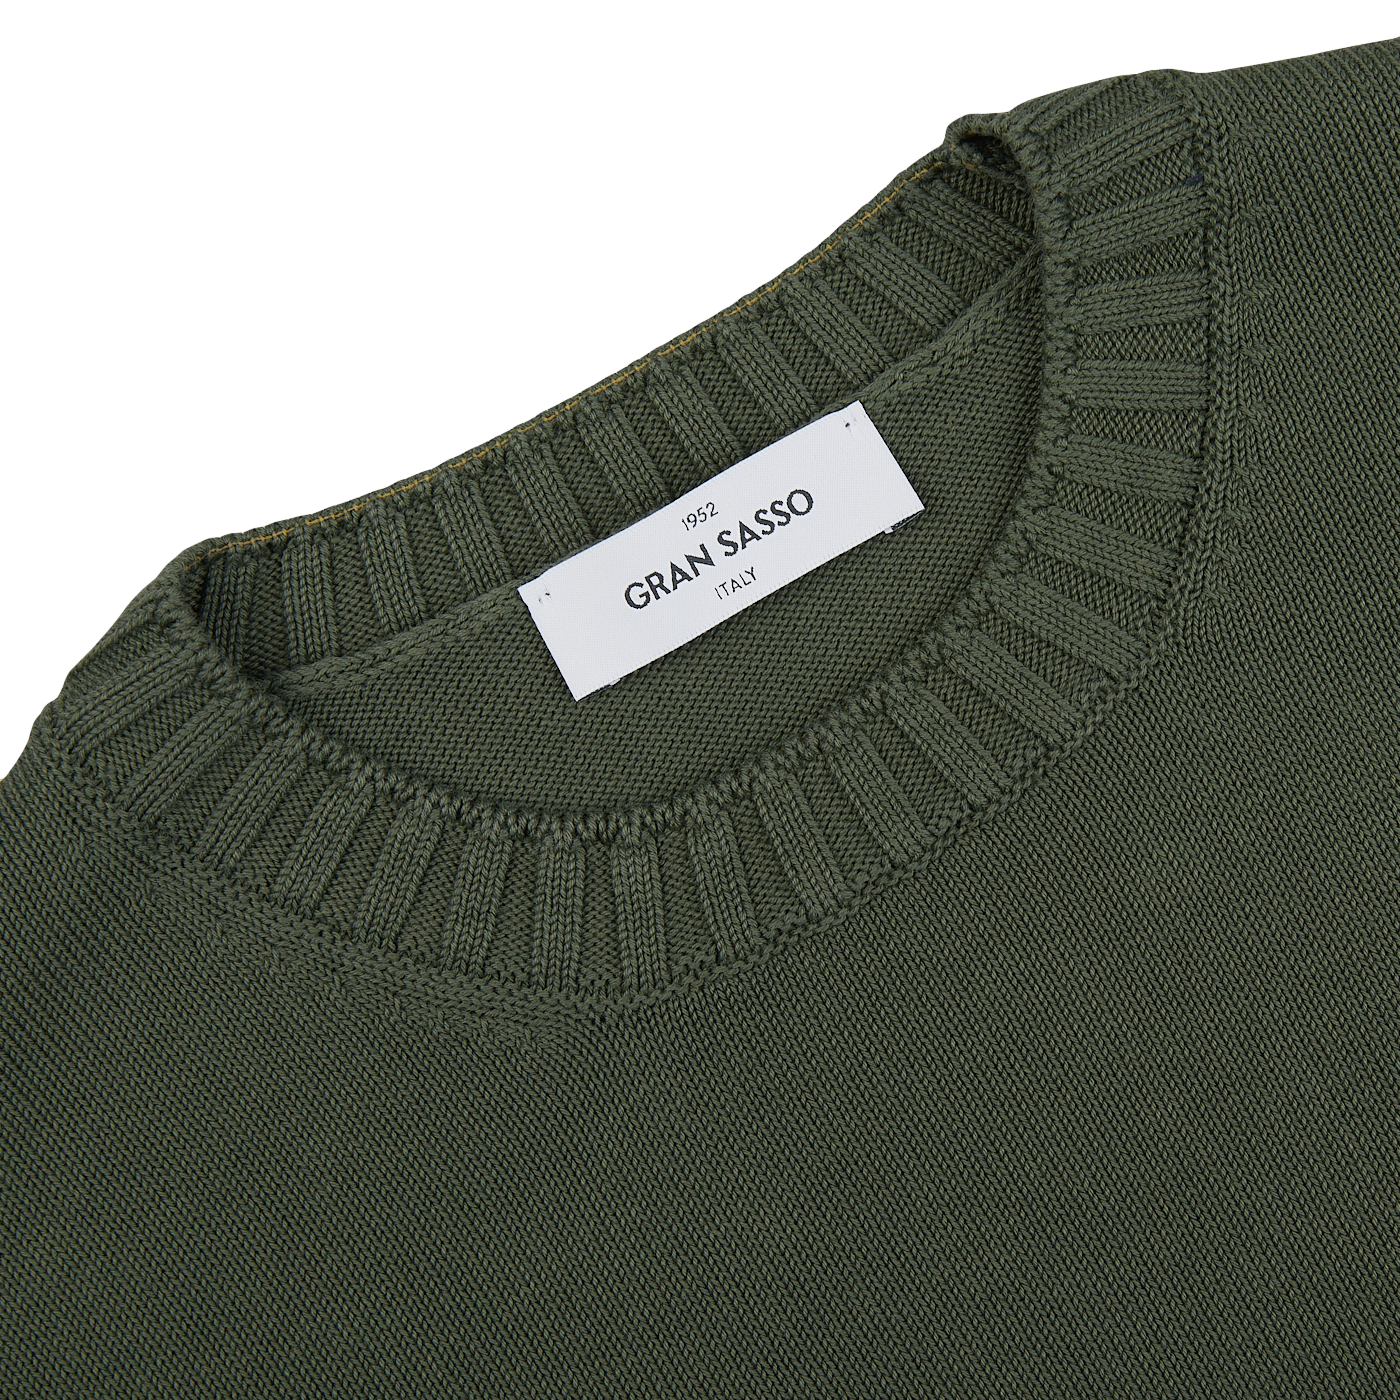 The back of a Gran Sasso Dark Green Egyptian Cotton Crewneck Sweater with a label on it.